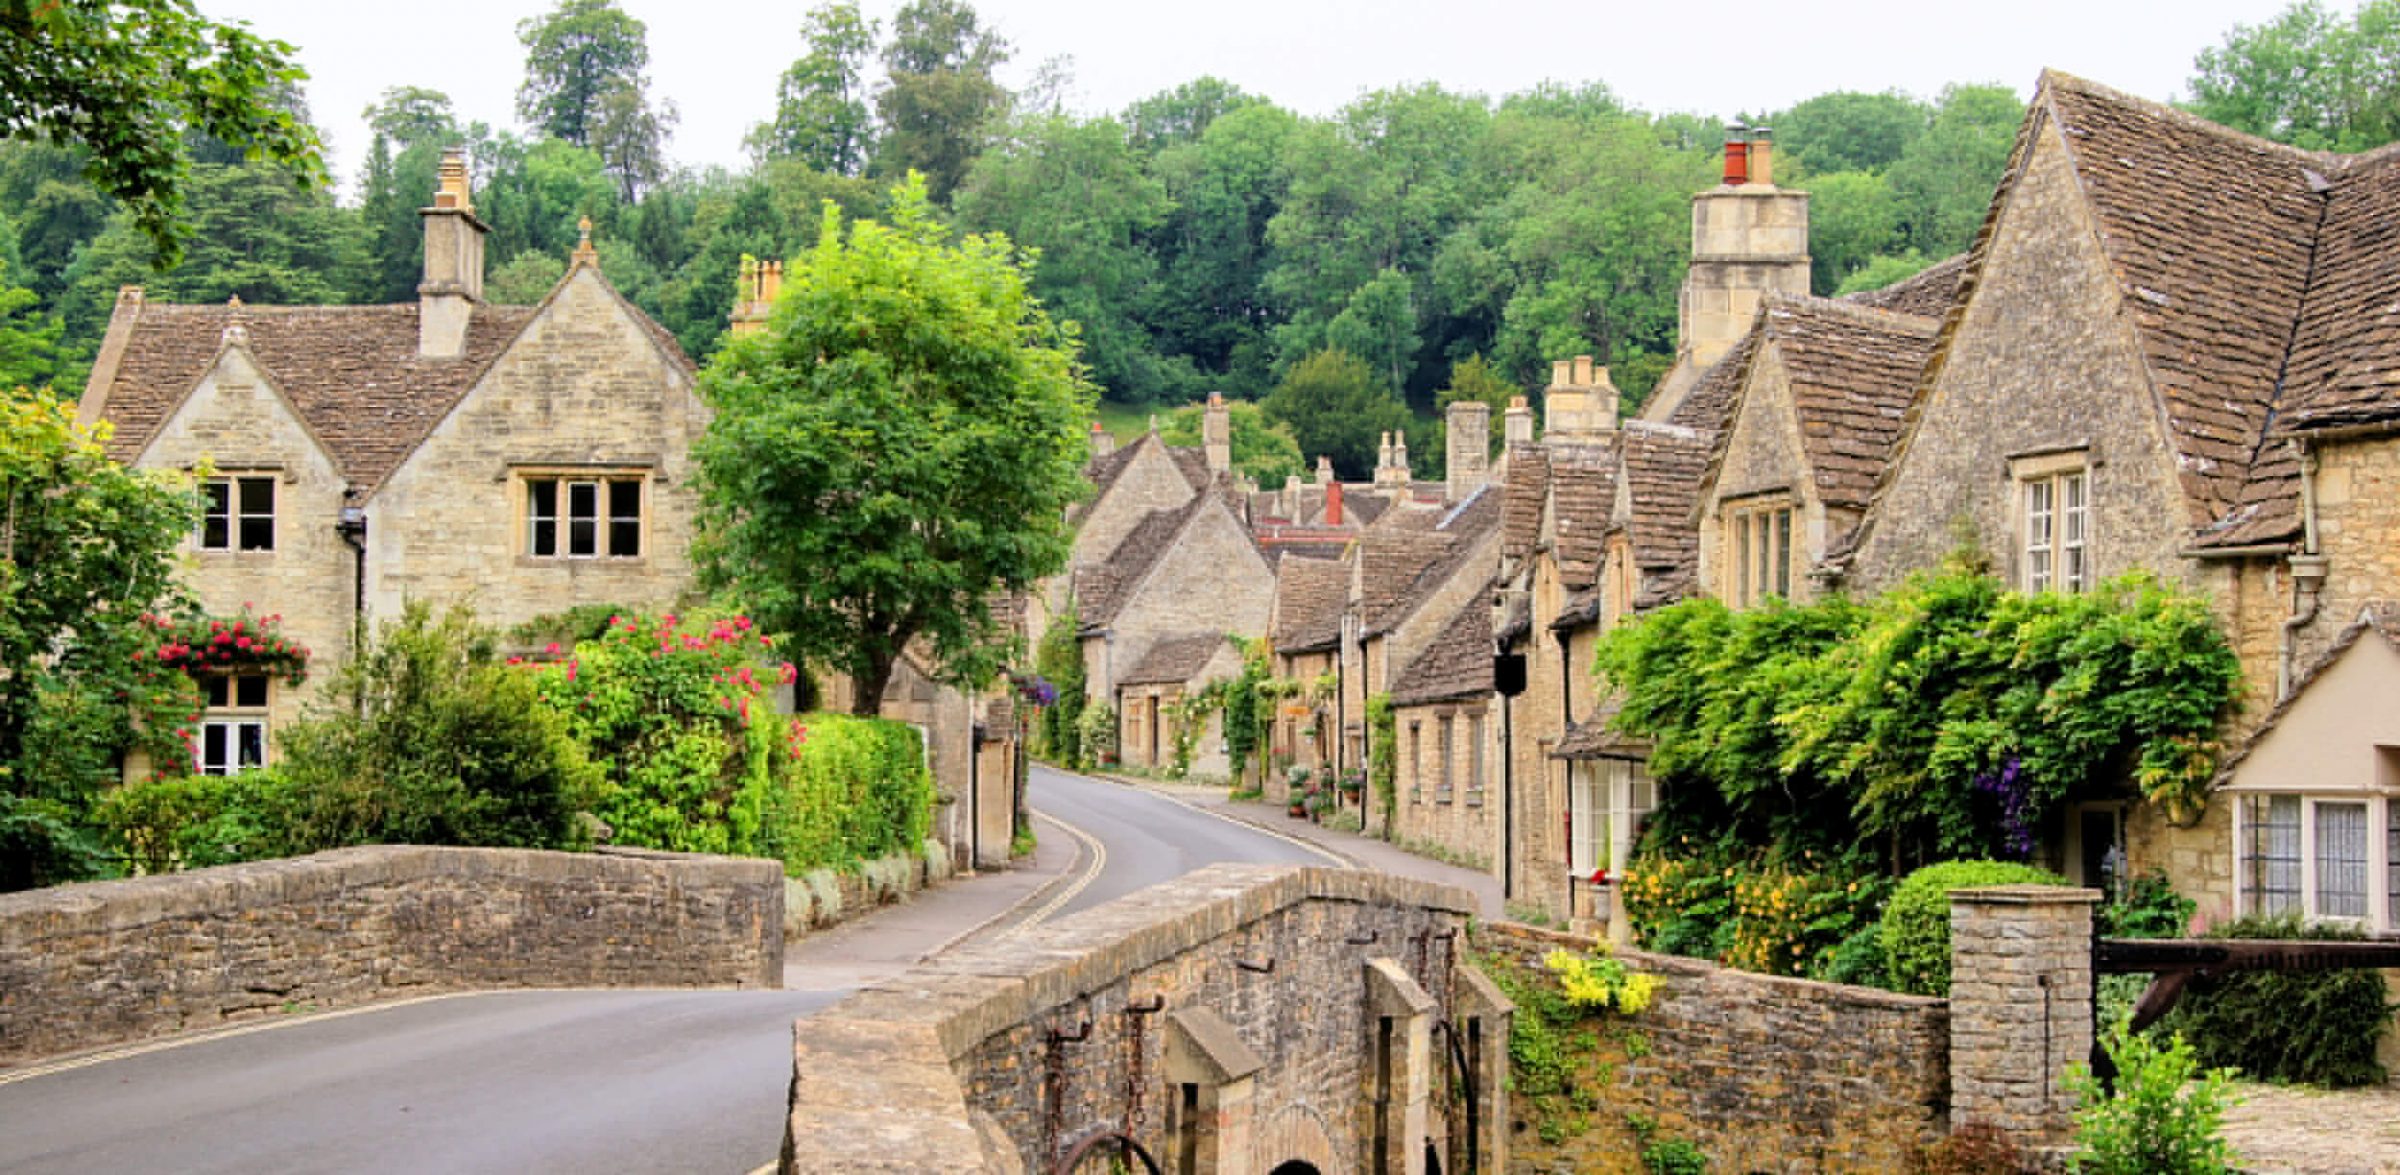 The 10 Best Places to Stay in the Cotswolds | Sykes Holiday Cottages